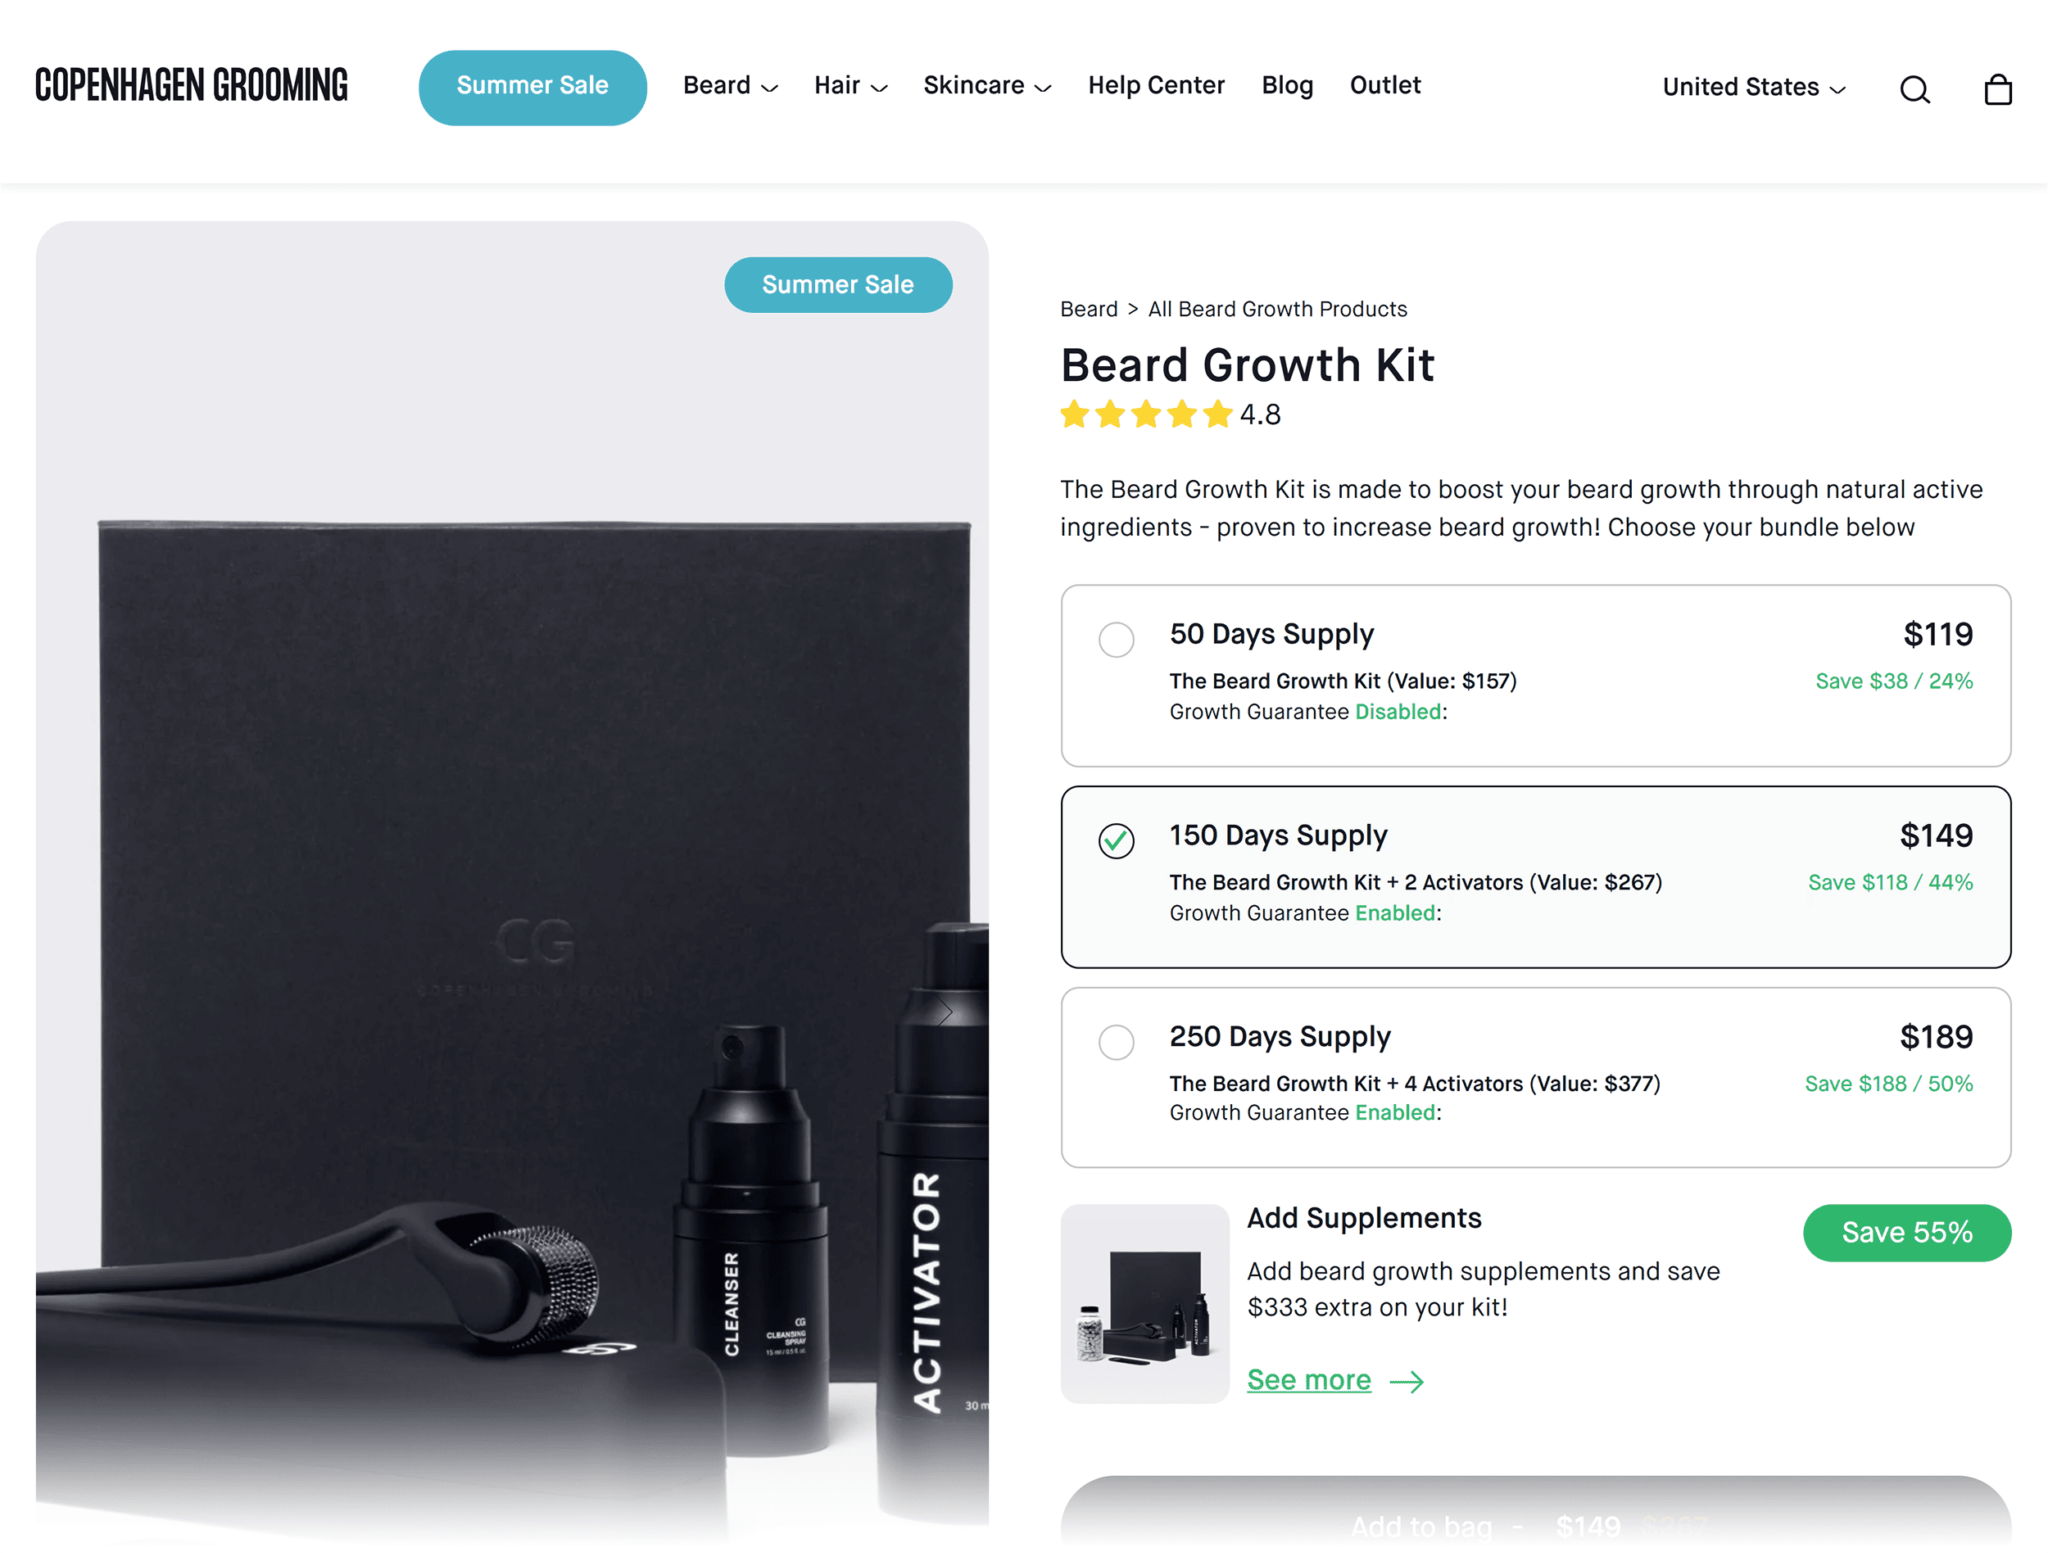 cphgrooming-the-beard-growth-kit 20 Effective Product Page Examples (+ Best Practices)